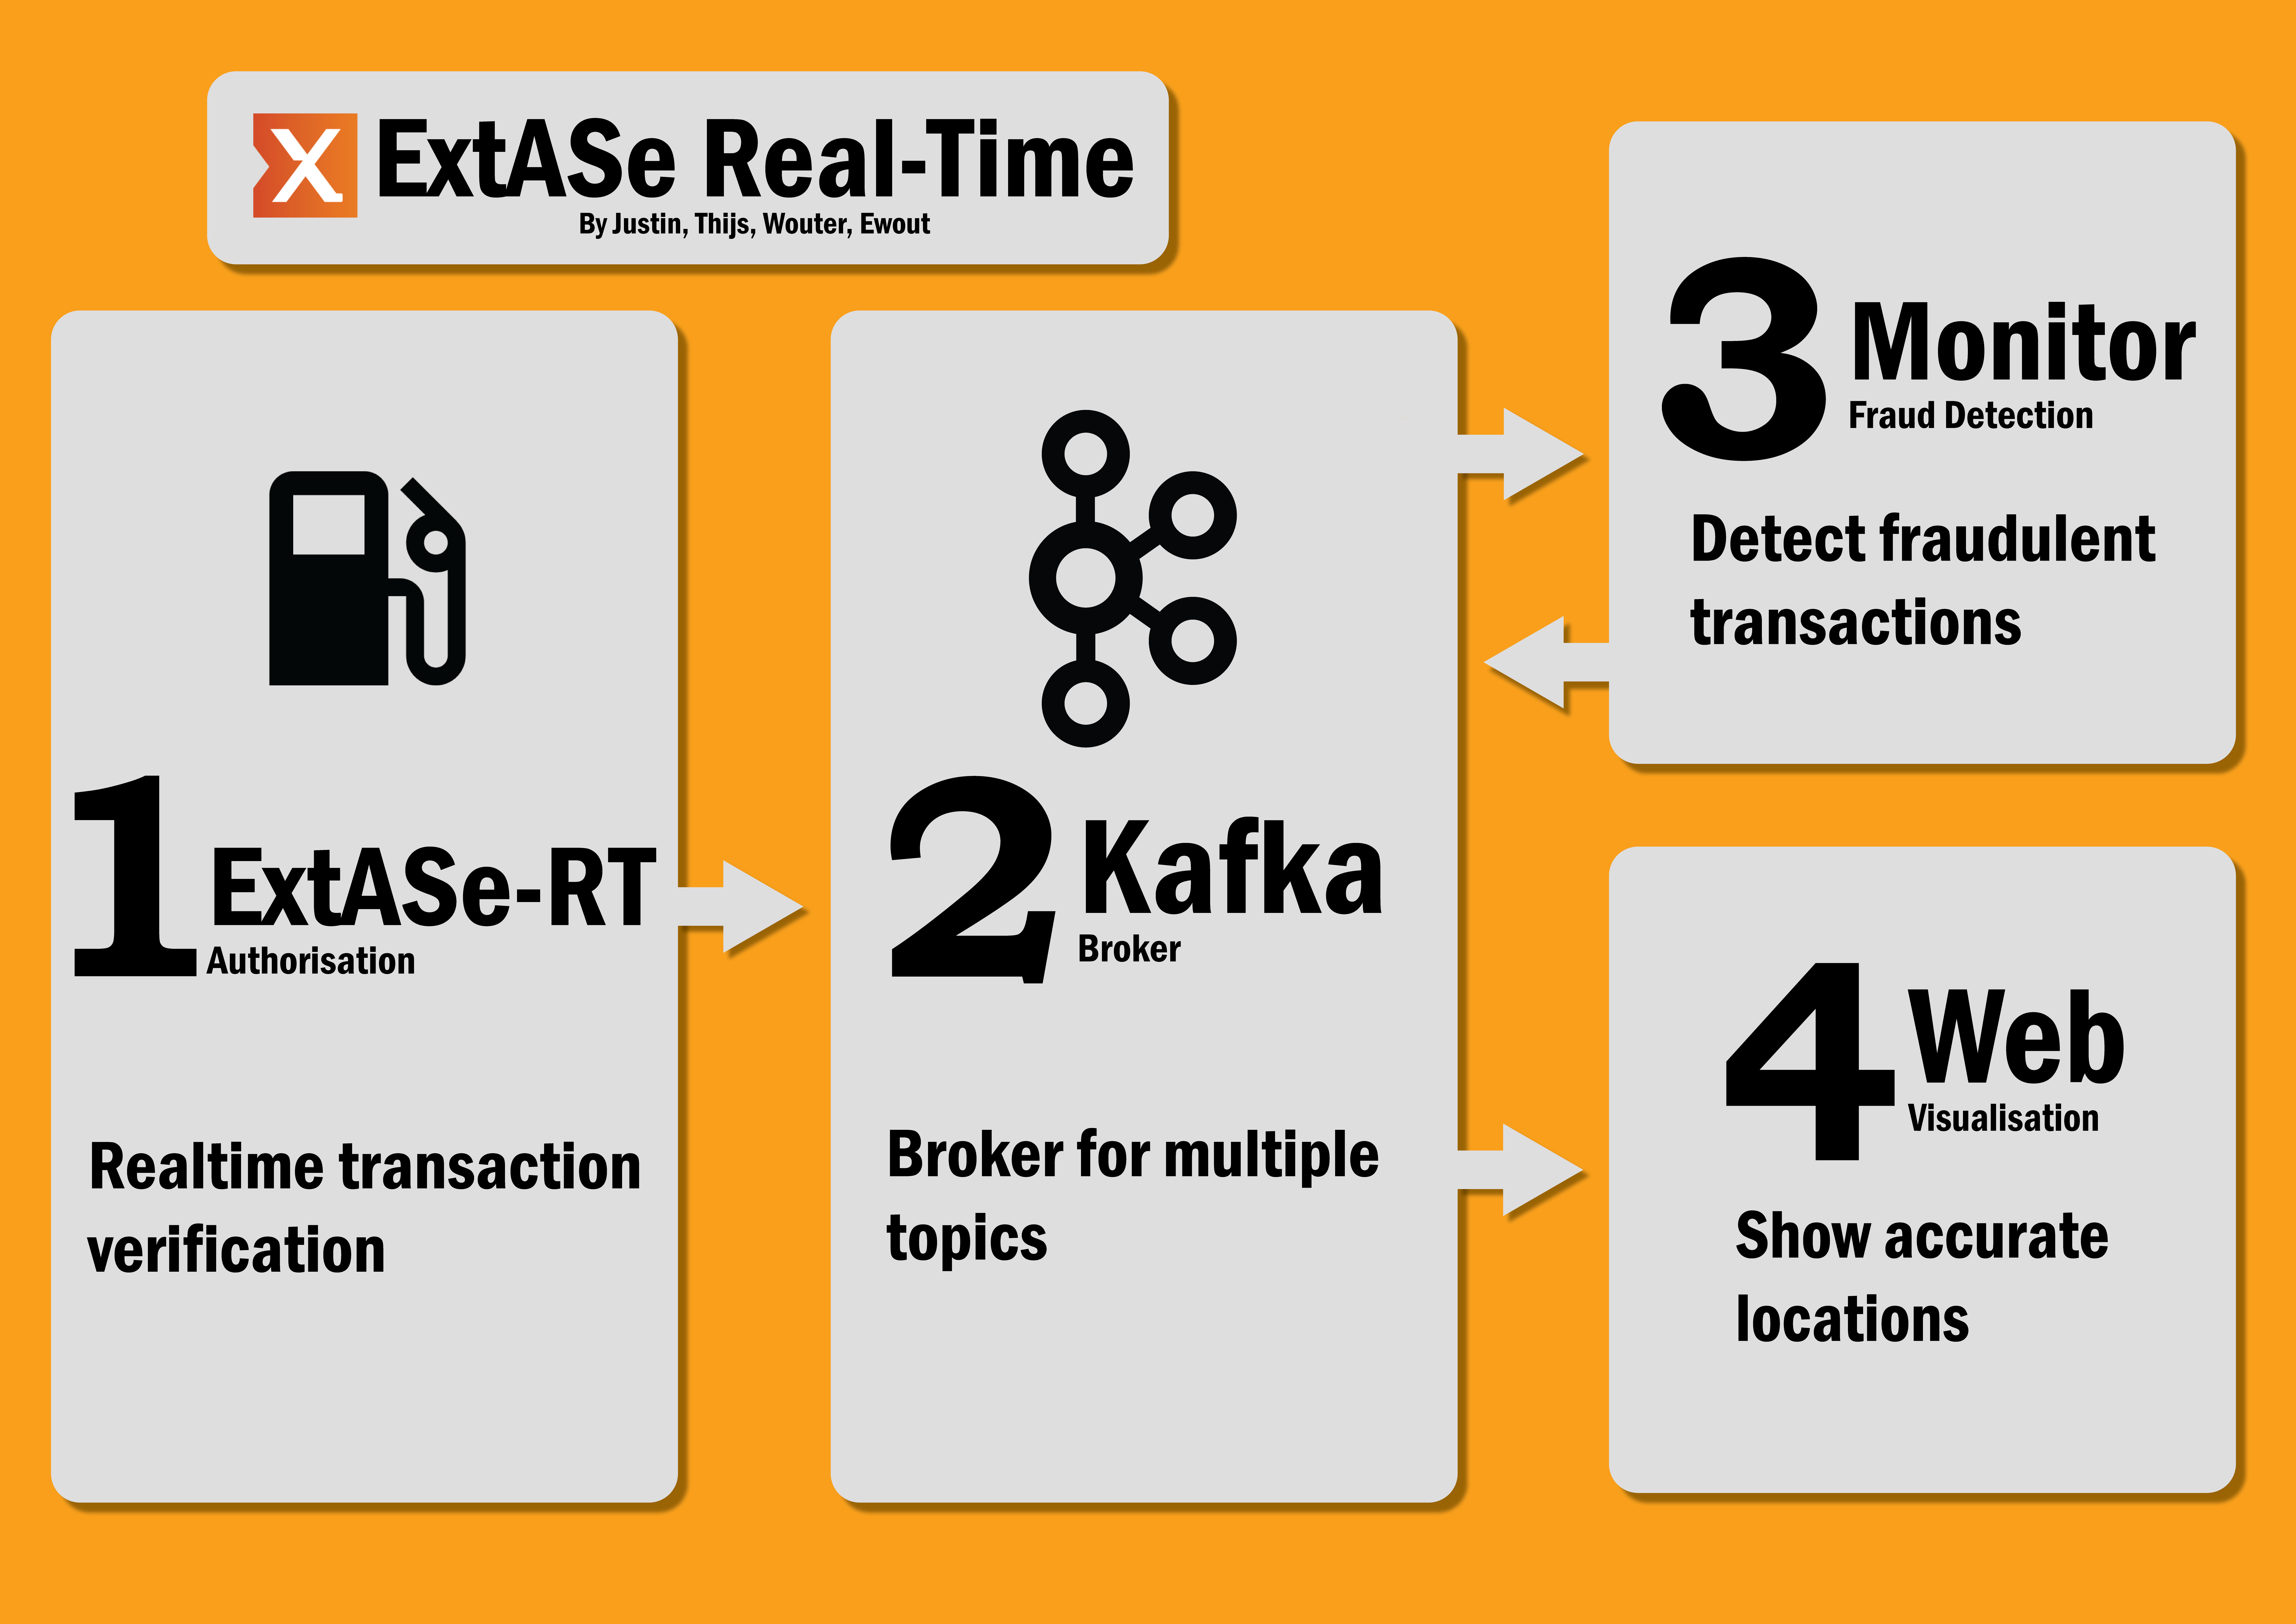 Poster, ExtASe-RT: Extending an existing authentication system to achieve real-time communications